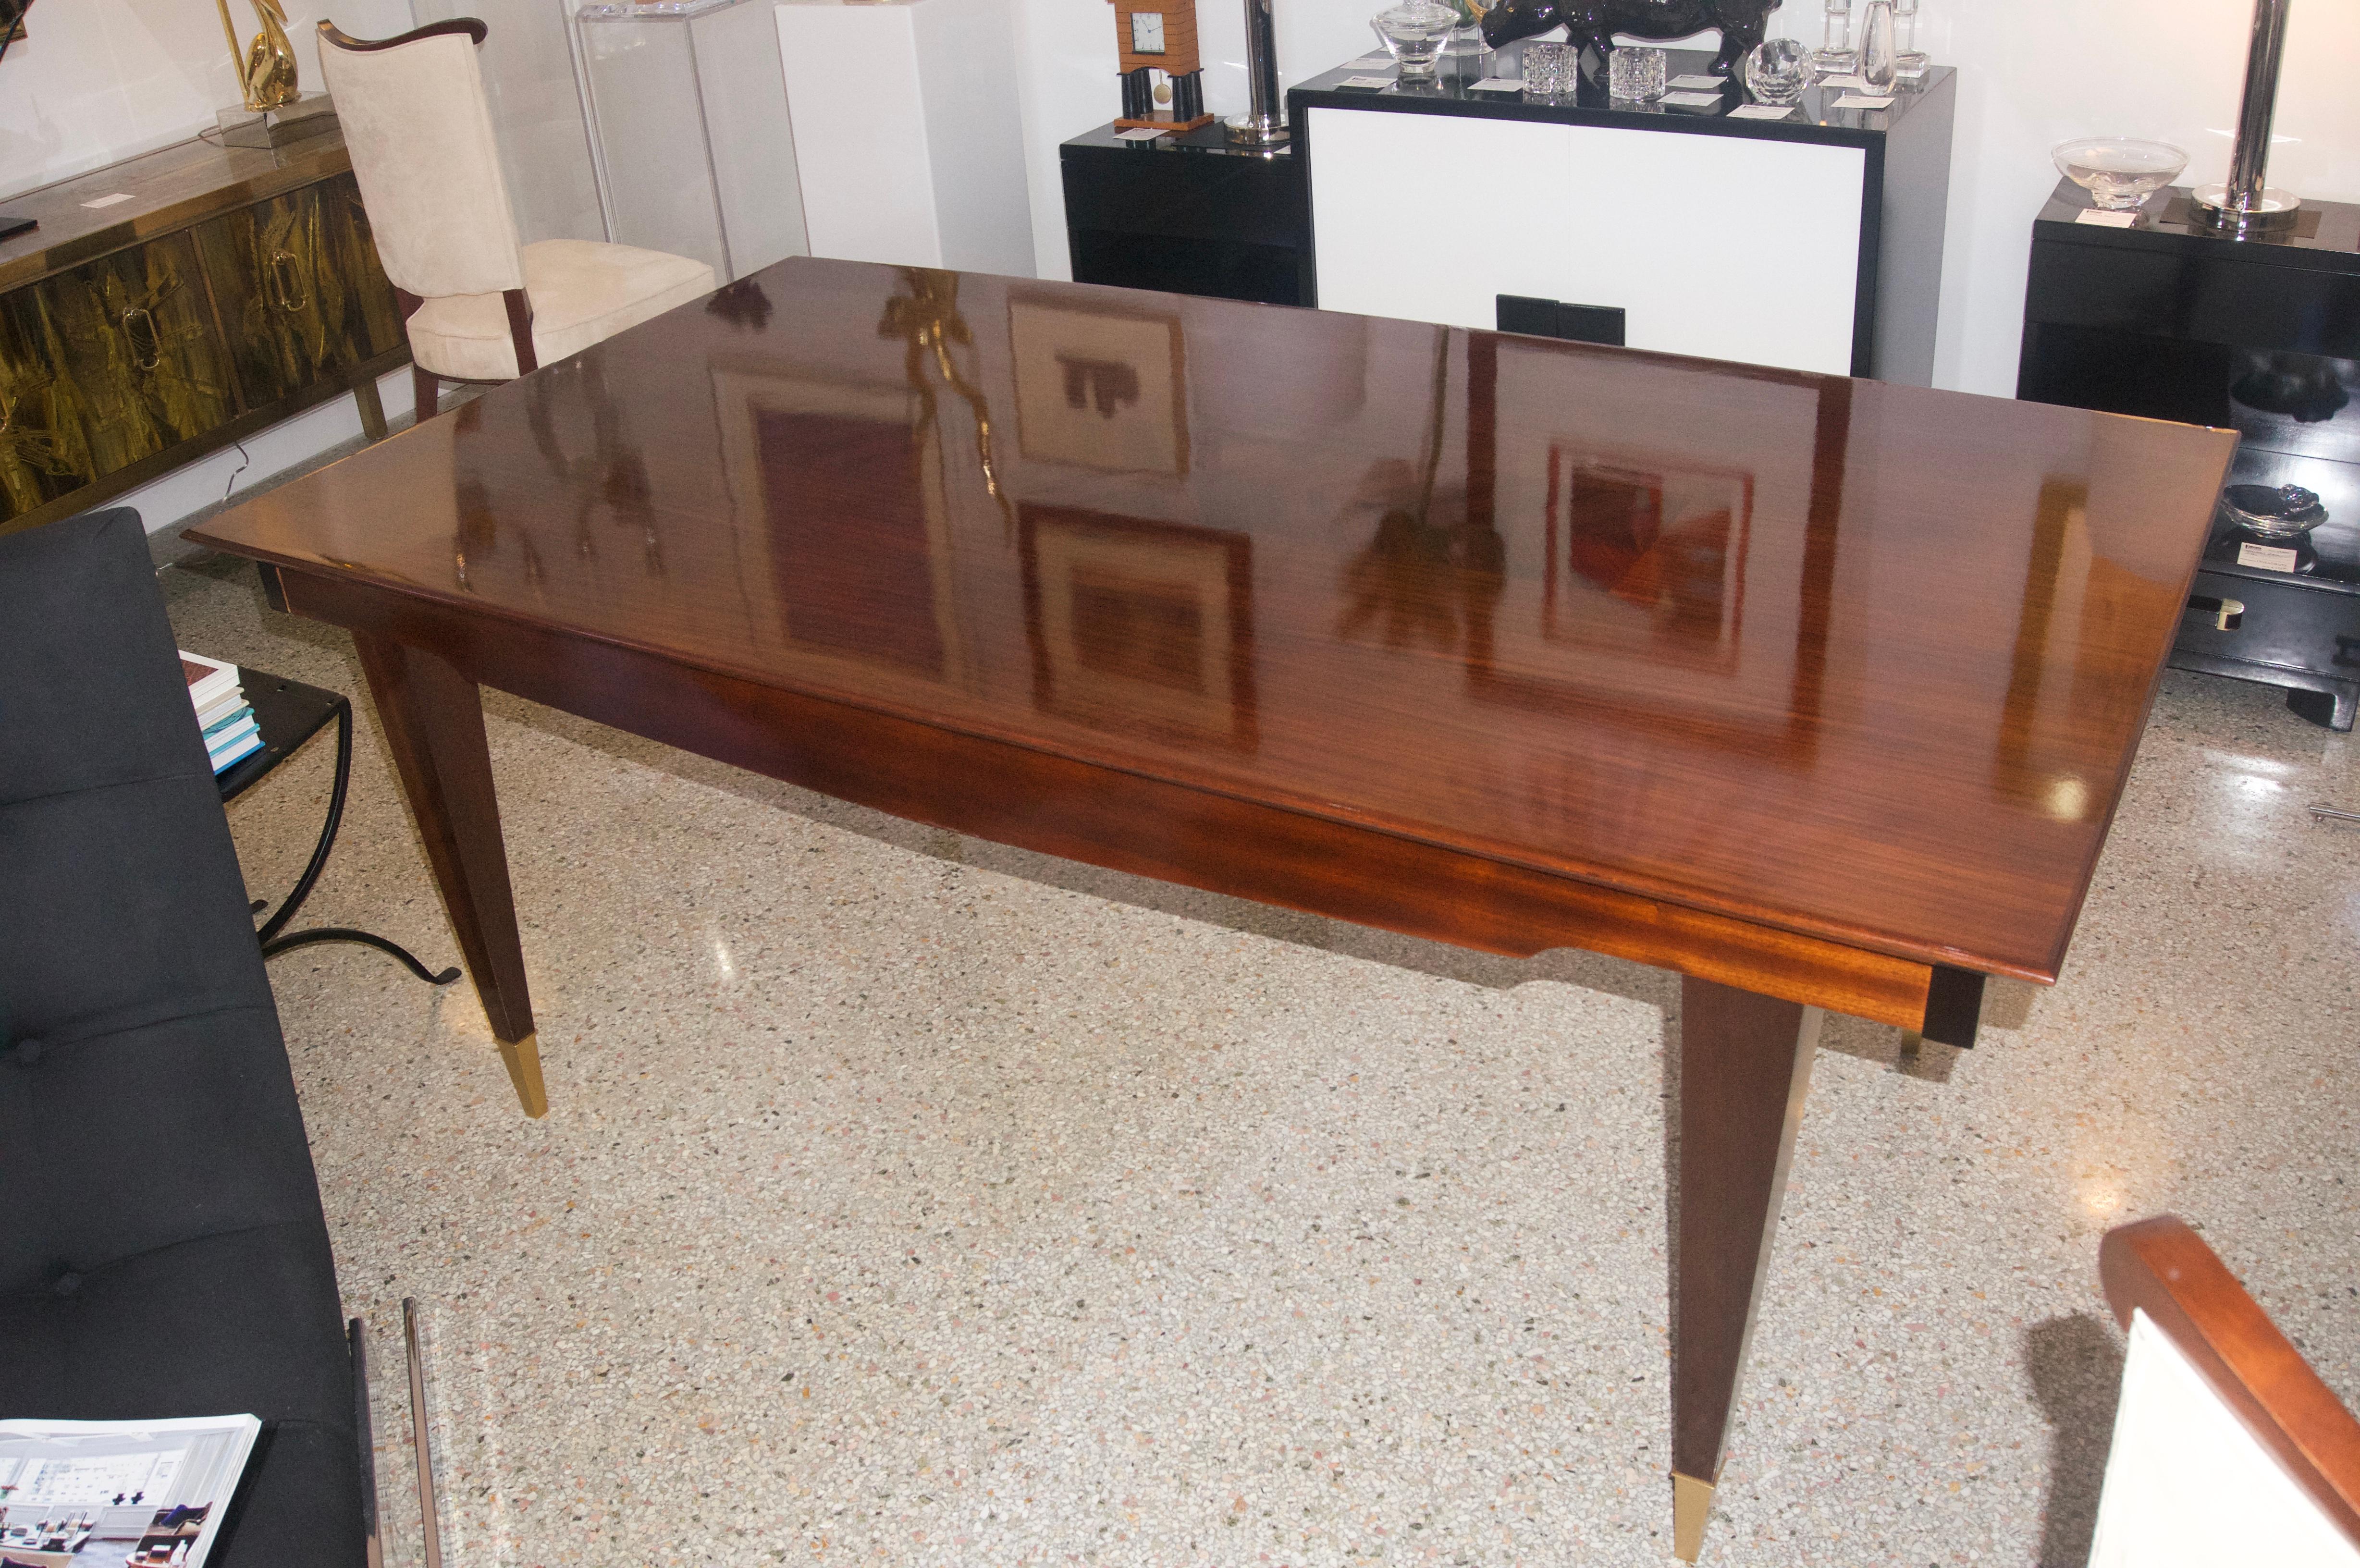 This stylish and chic dining table is very much in the style of pieces created by the Italian, furniture designer Paolo Buffa. The piece has been professionally refinished and restored. The restoration included the addition of two extension leaves